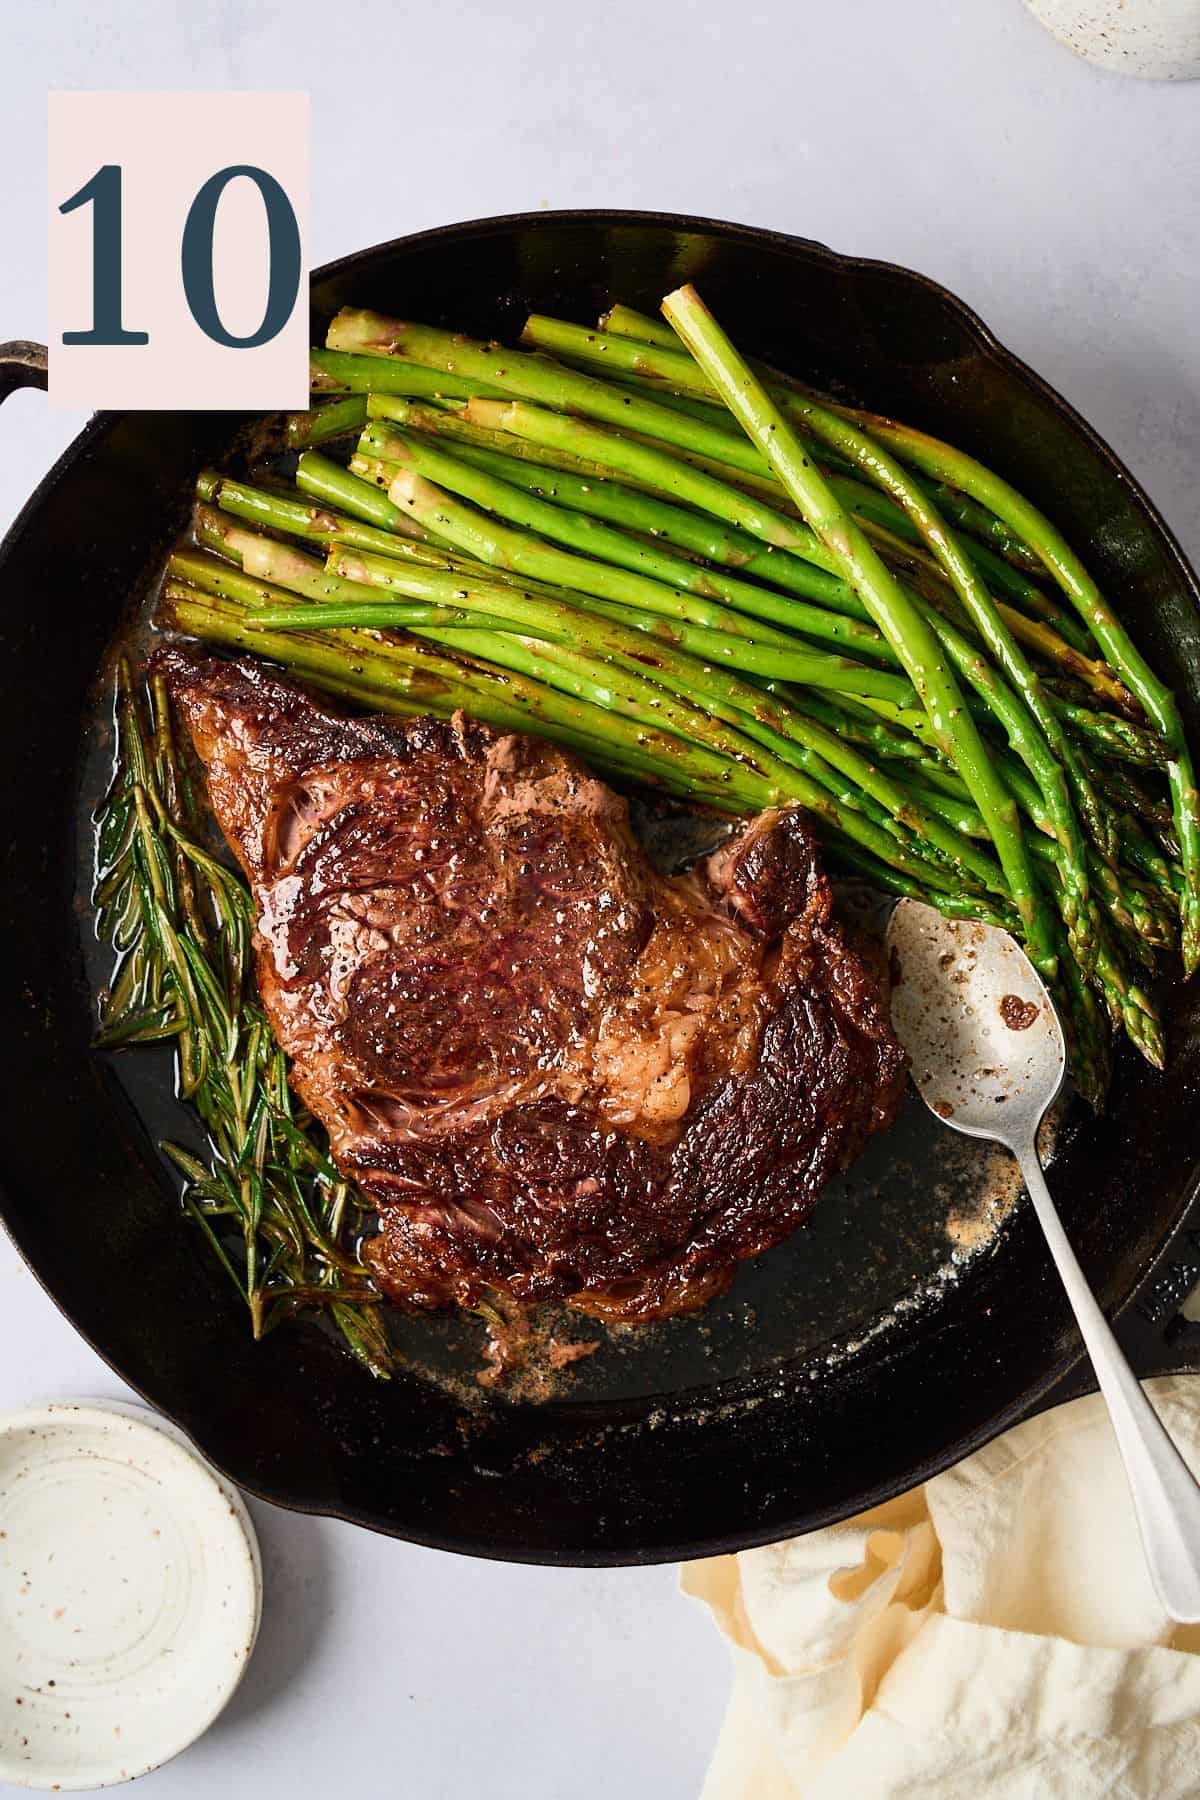 Steak in a skillet with rosemary, a spoon and asparagus added.